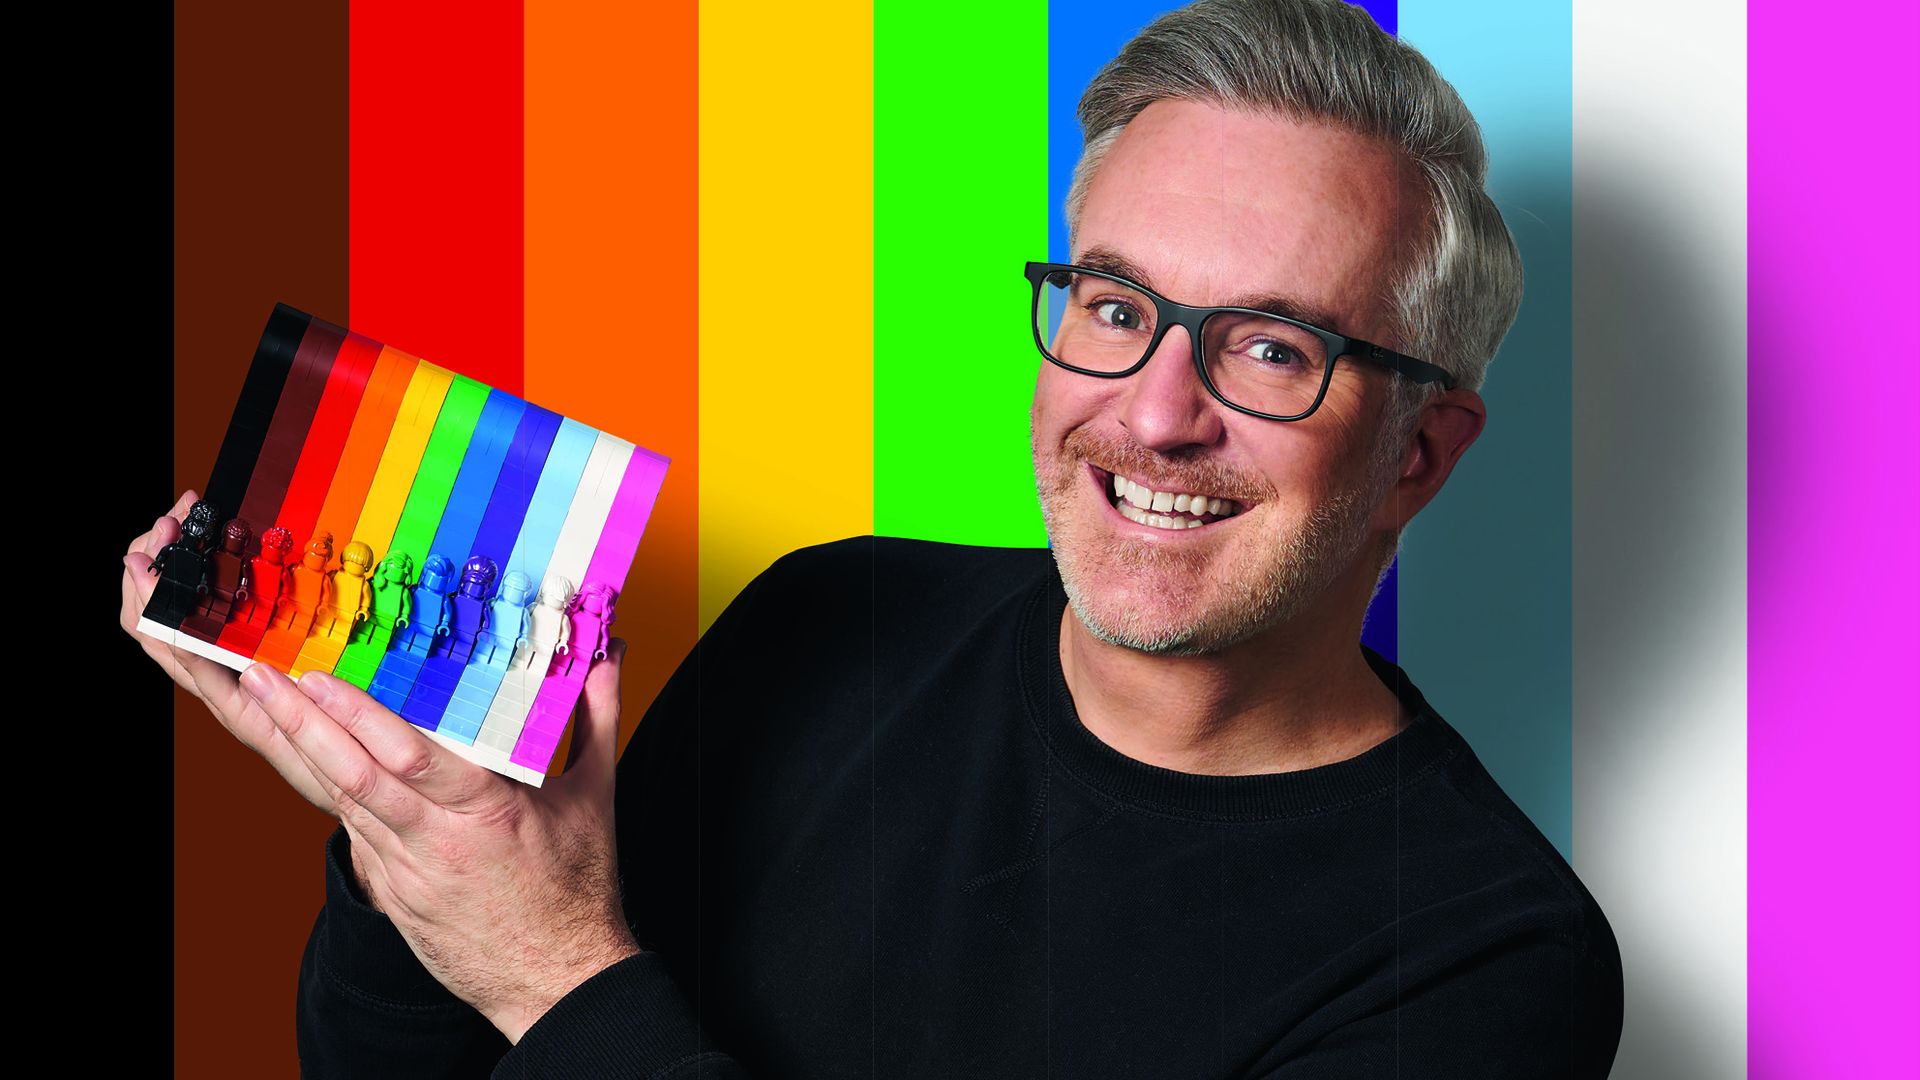 Lego designer Matthew Ashton shows off the company's new "Everyone is Awesome" set of mini figures in a rainbow of colors.